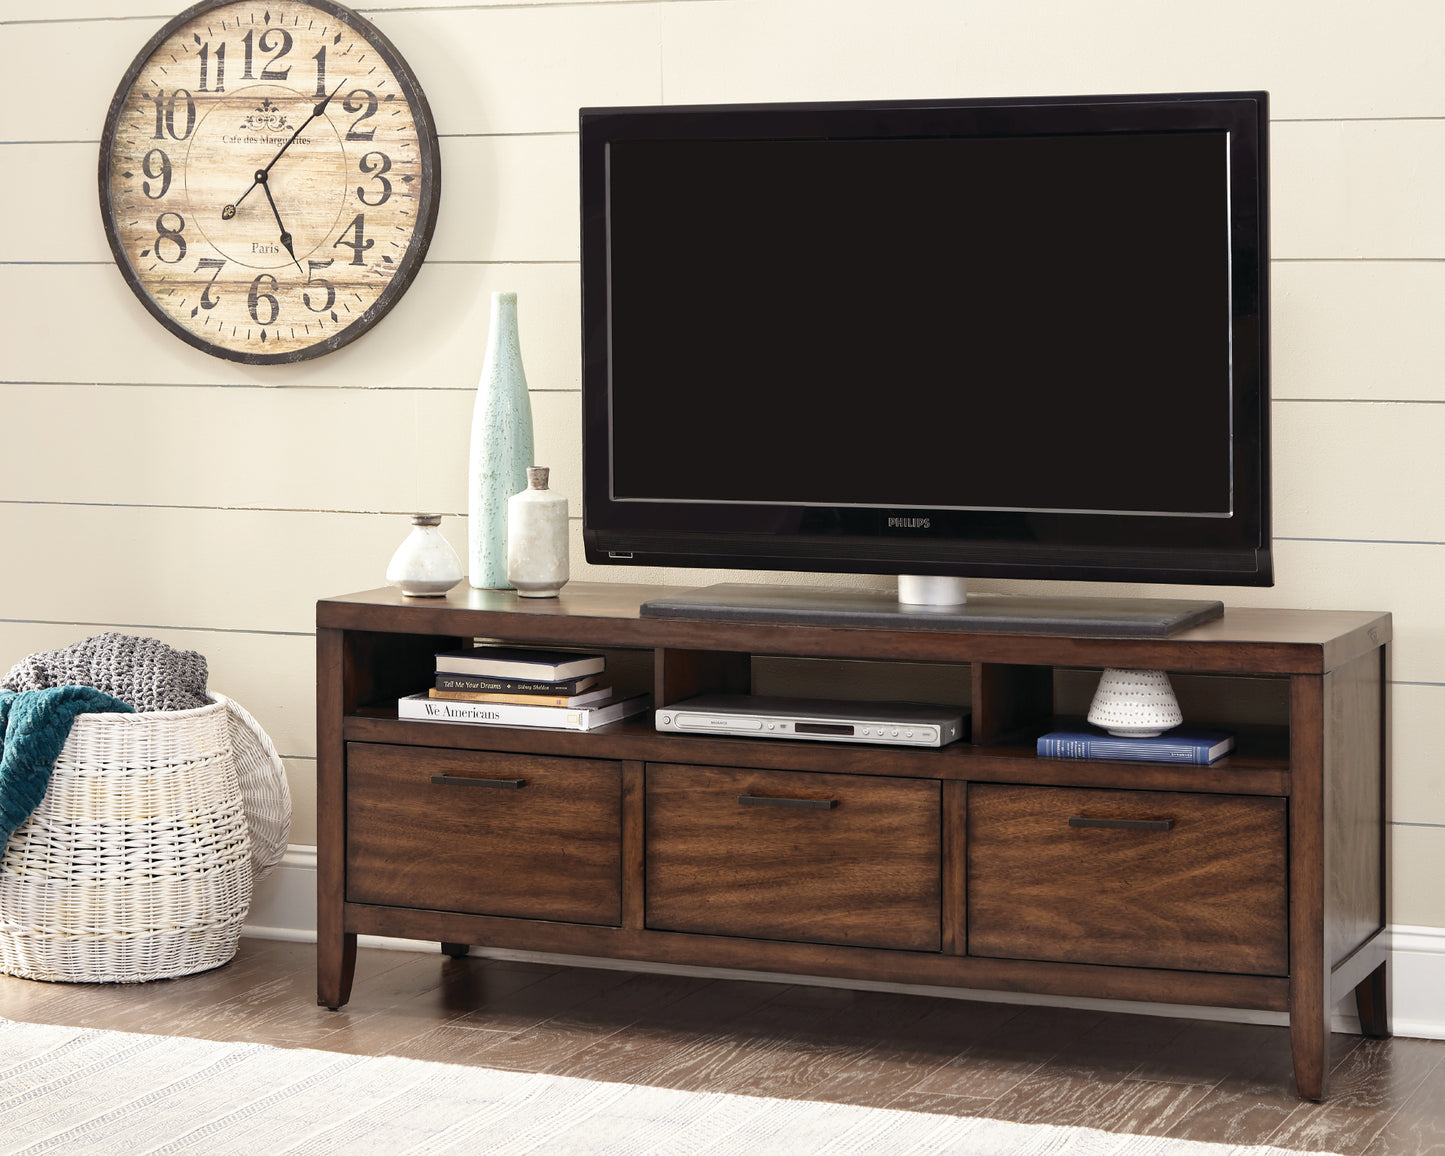 TV6139 - TV Stand